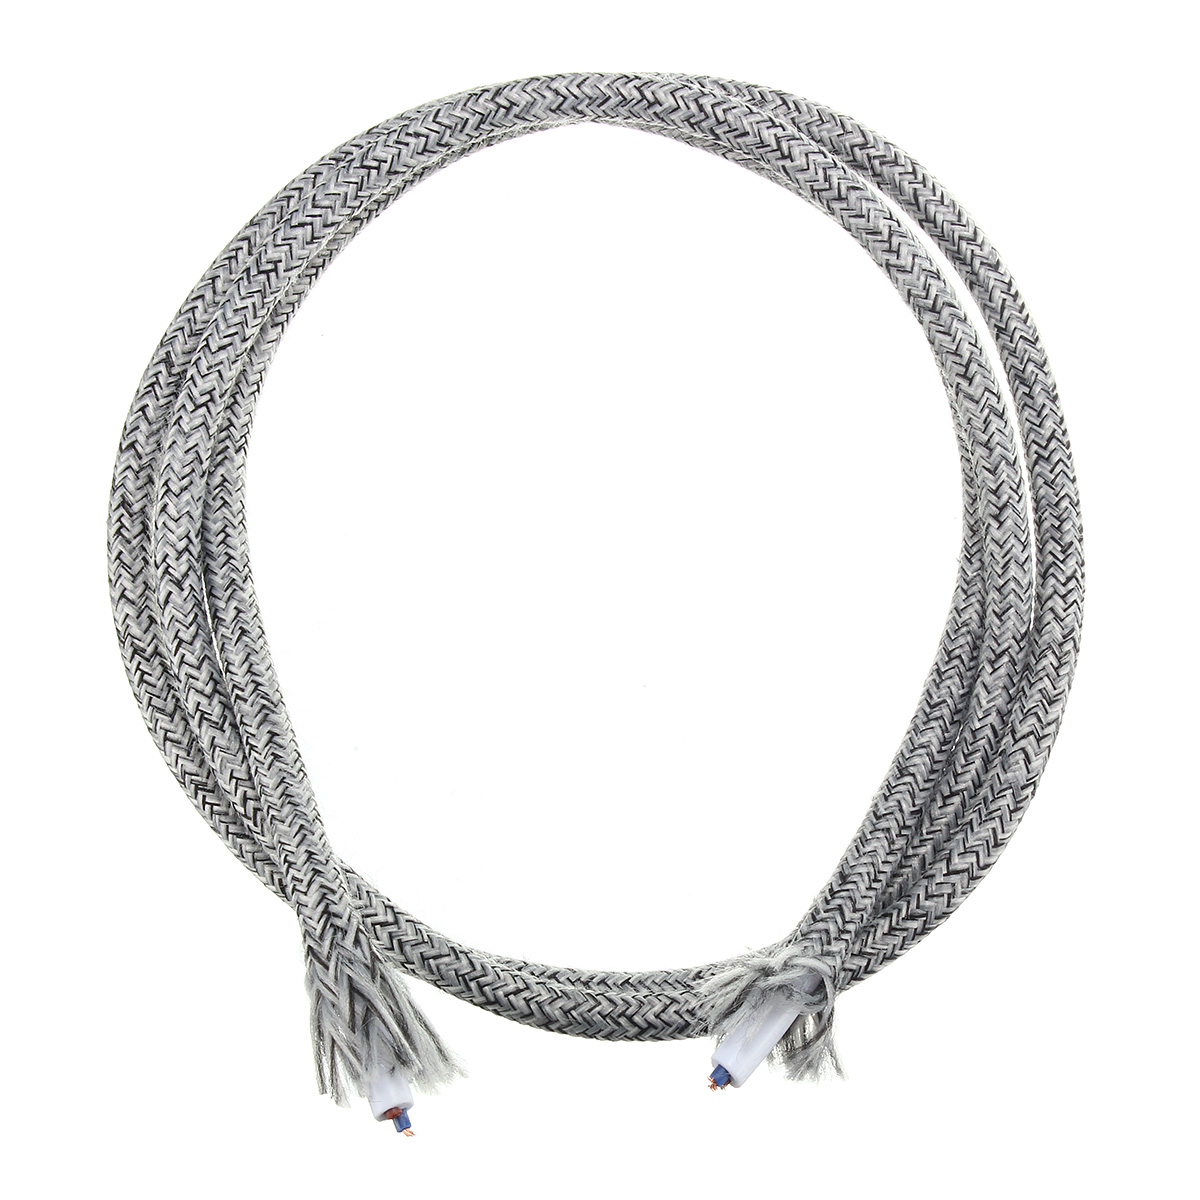 1M-2-Cord-Color-Vintage-Twist-Braided-Fabric-Light-Cable-Electric-Wire-1069141-5